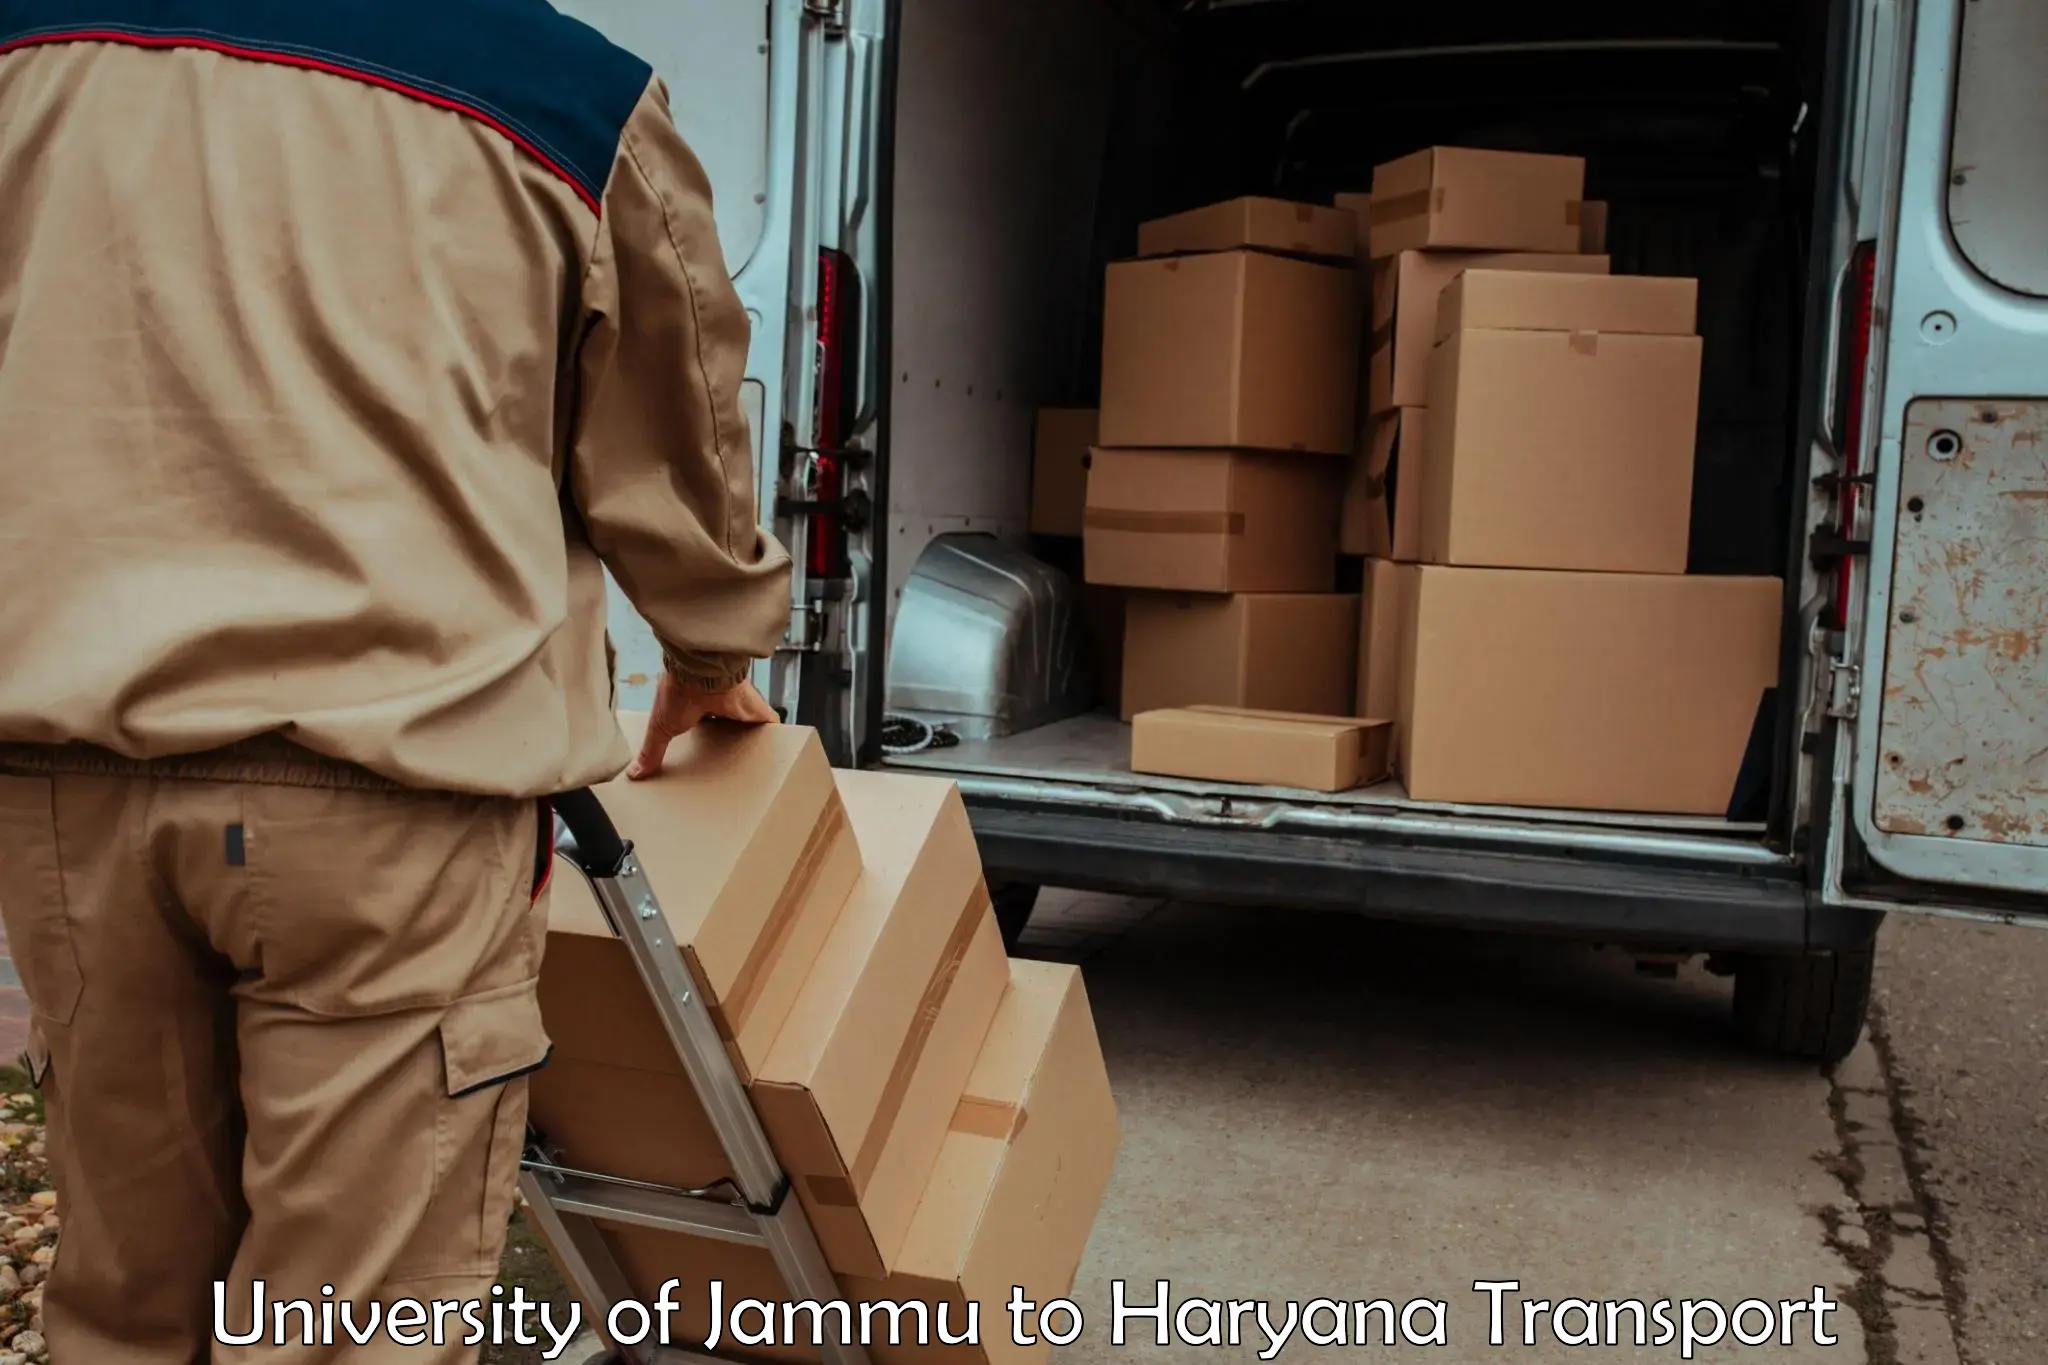 Road transport services in University of Jammu to Ellenabad